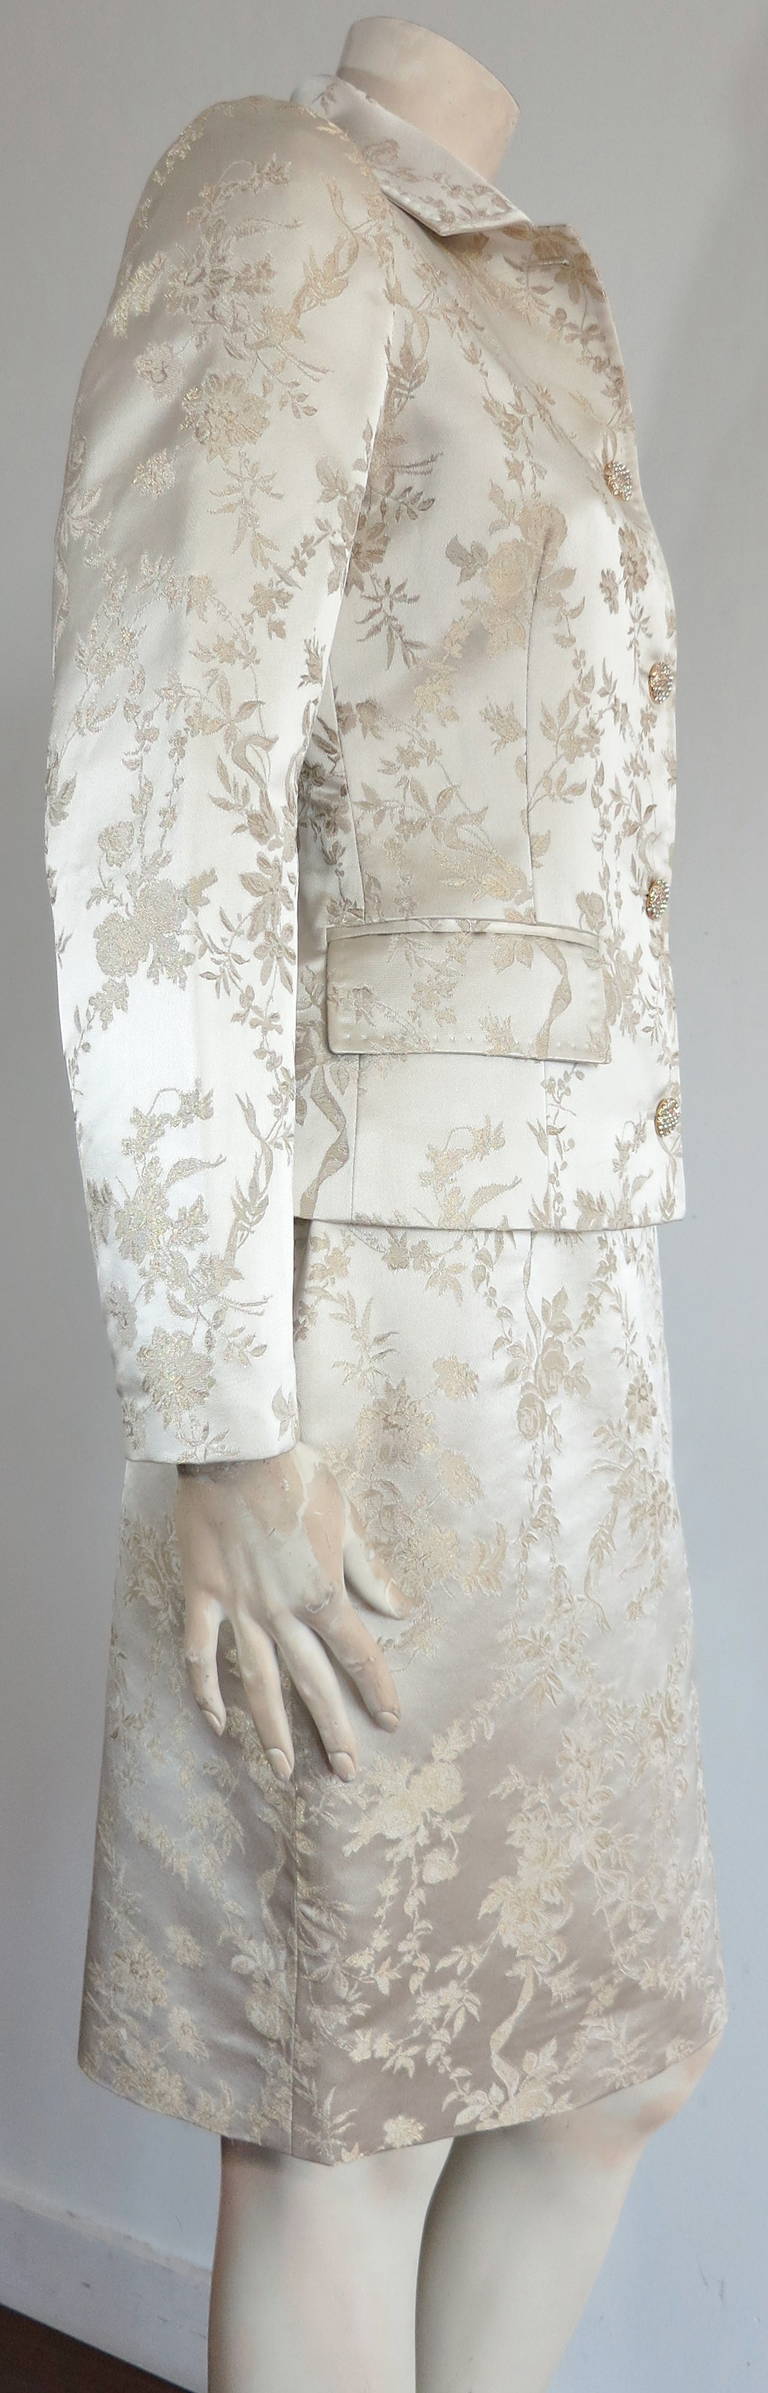 DOLCE & GABBANA Satin floral brocade evening skirt suit In Excellent Condition For Sale In Newport Beach, CA